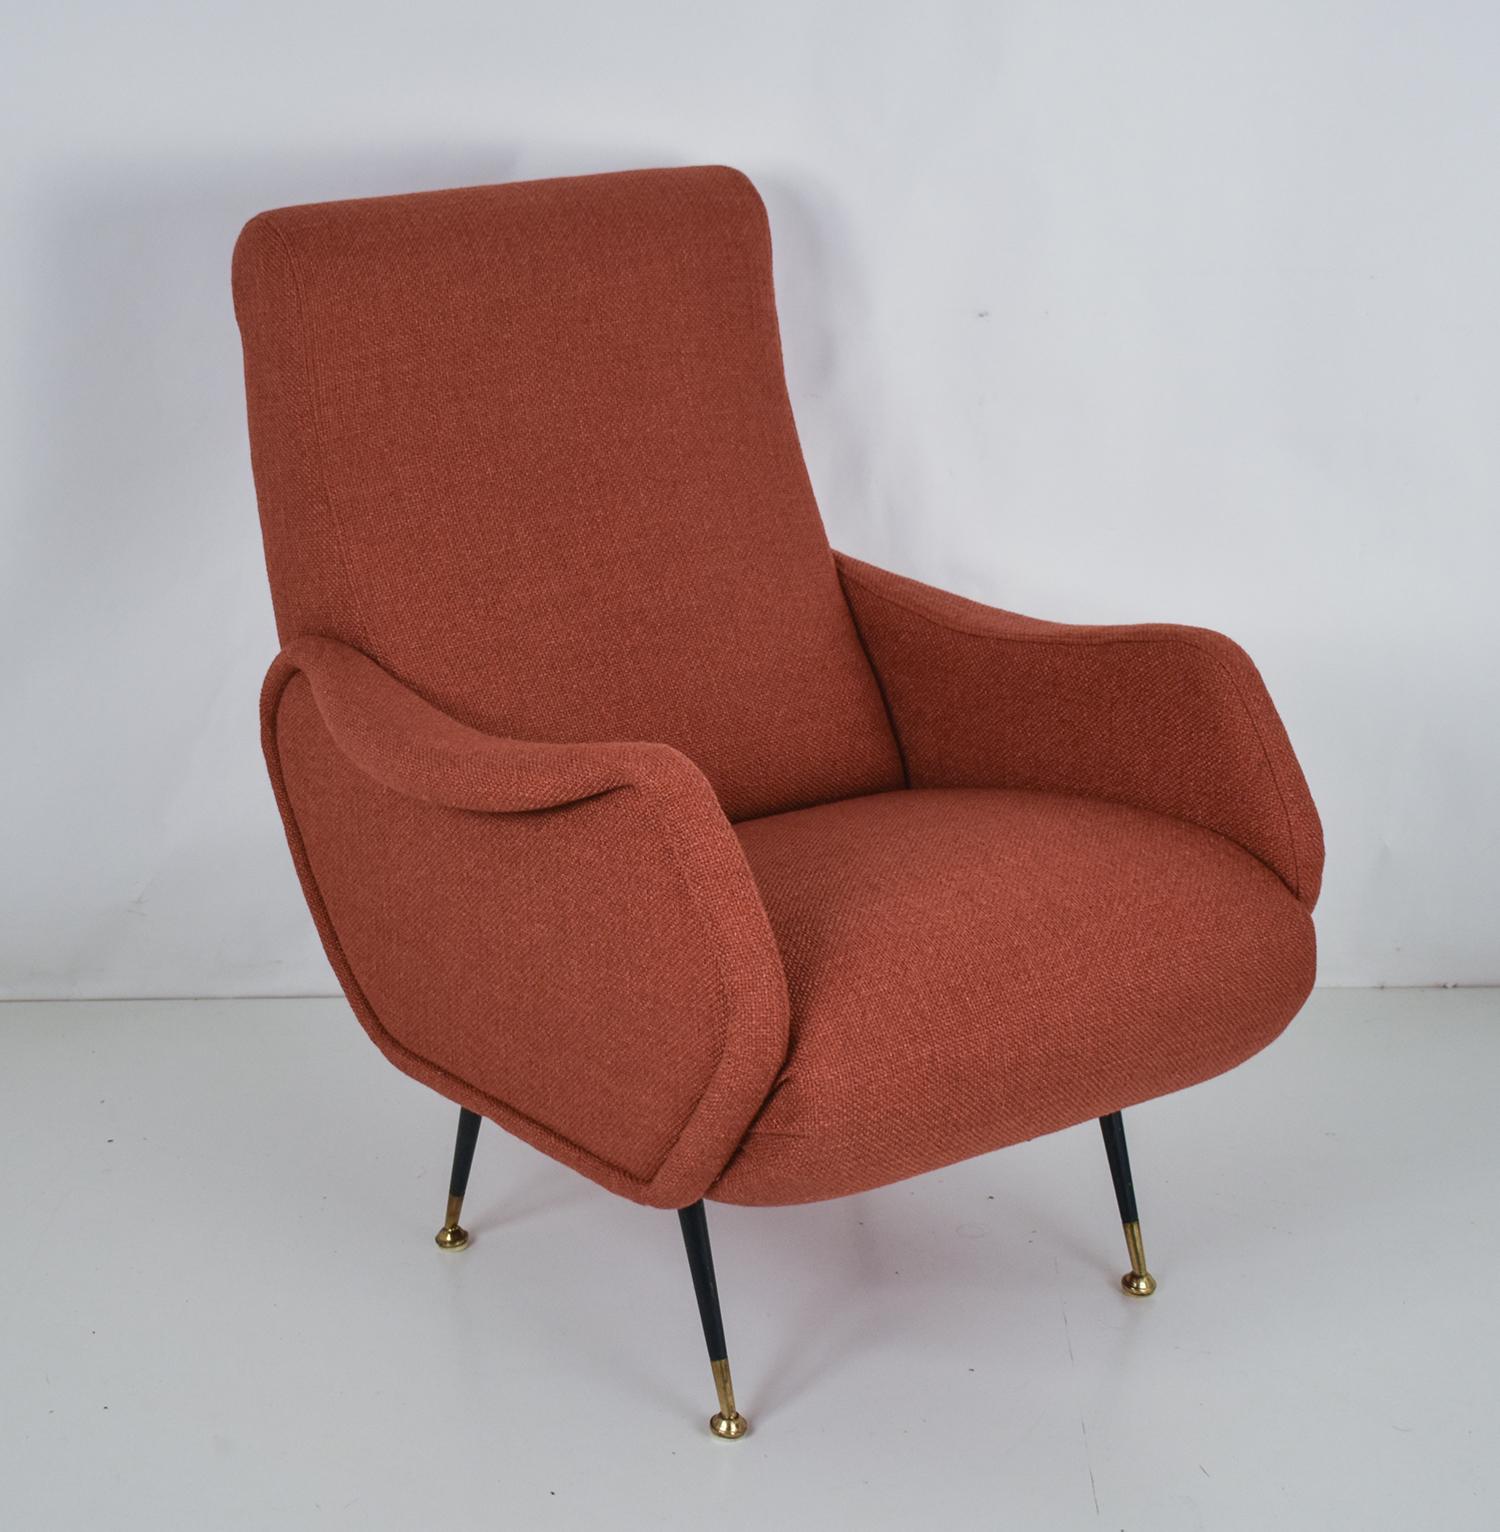 Italian Midcentury Armchair in the Style of Marco Zanuso  , reupholstered 1950's.
Black enamelled legs with brass feet, re-upholstered in a caldera color with Güell Lamadrid fabric.
The armchairs are completely refurbished inside with quality